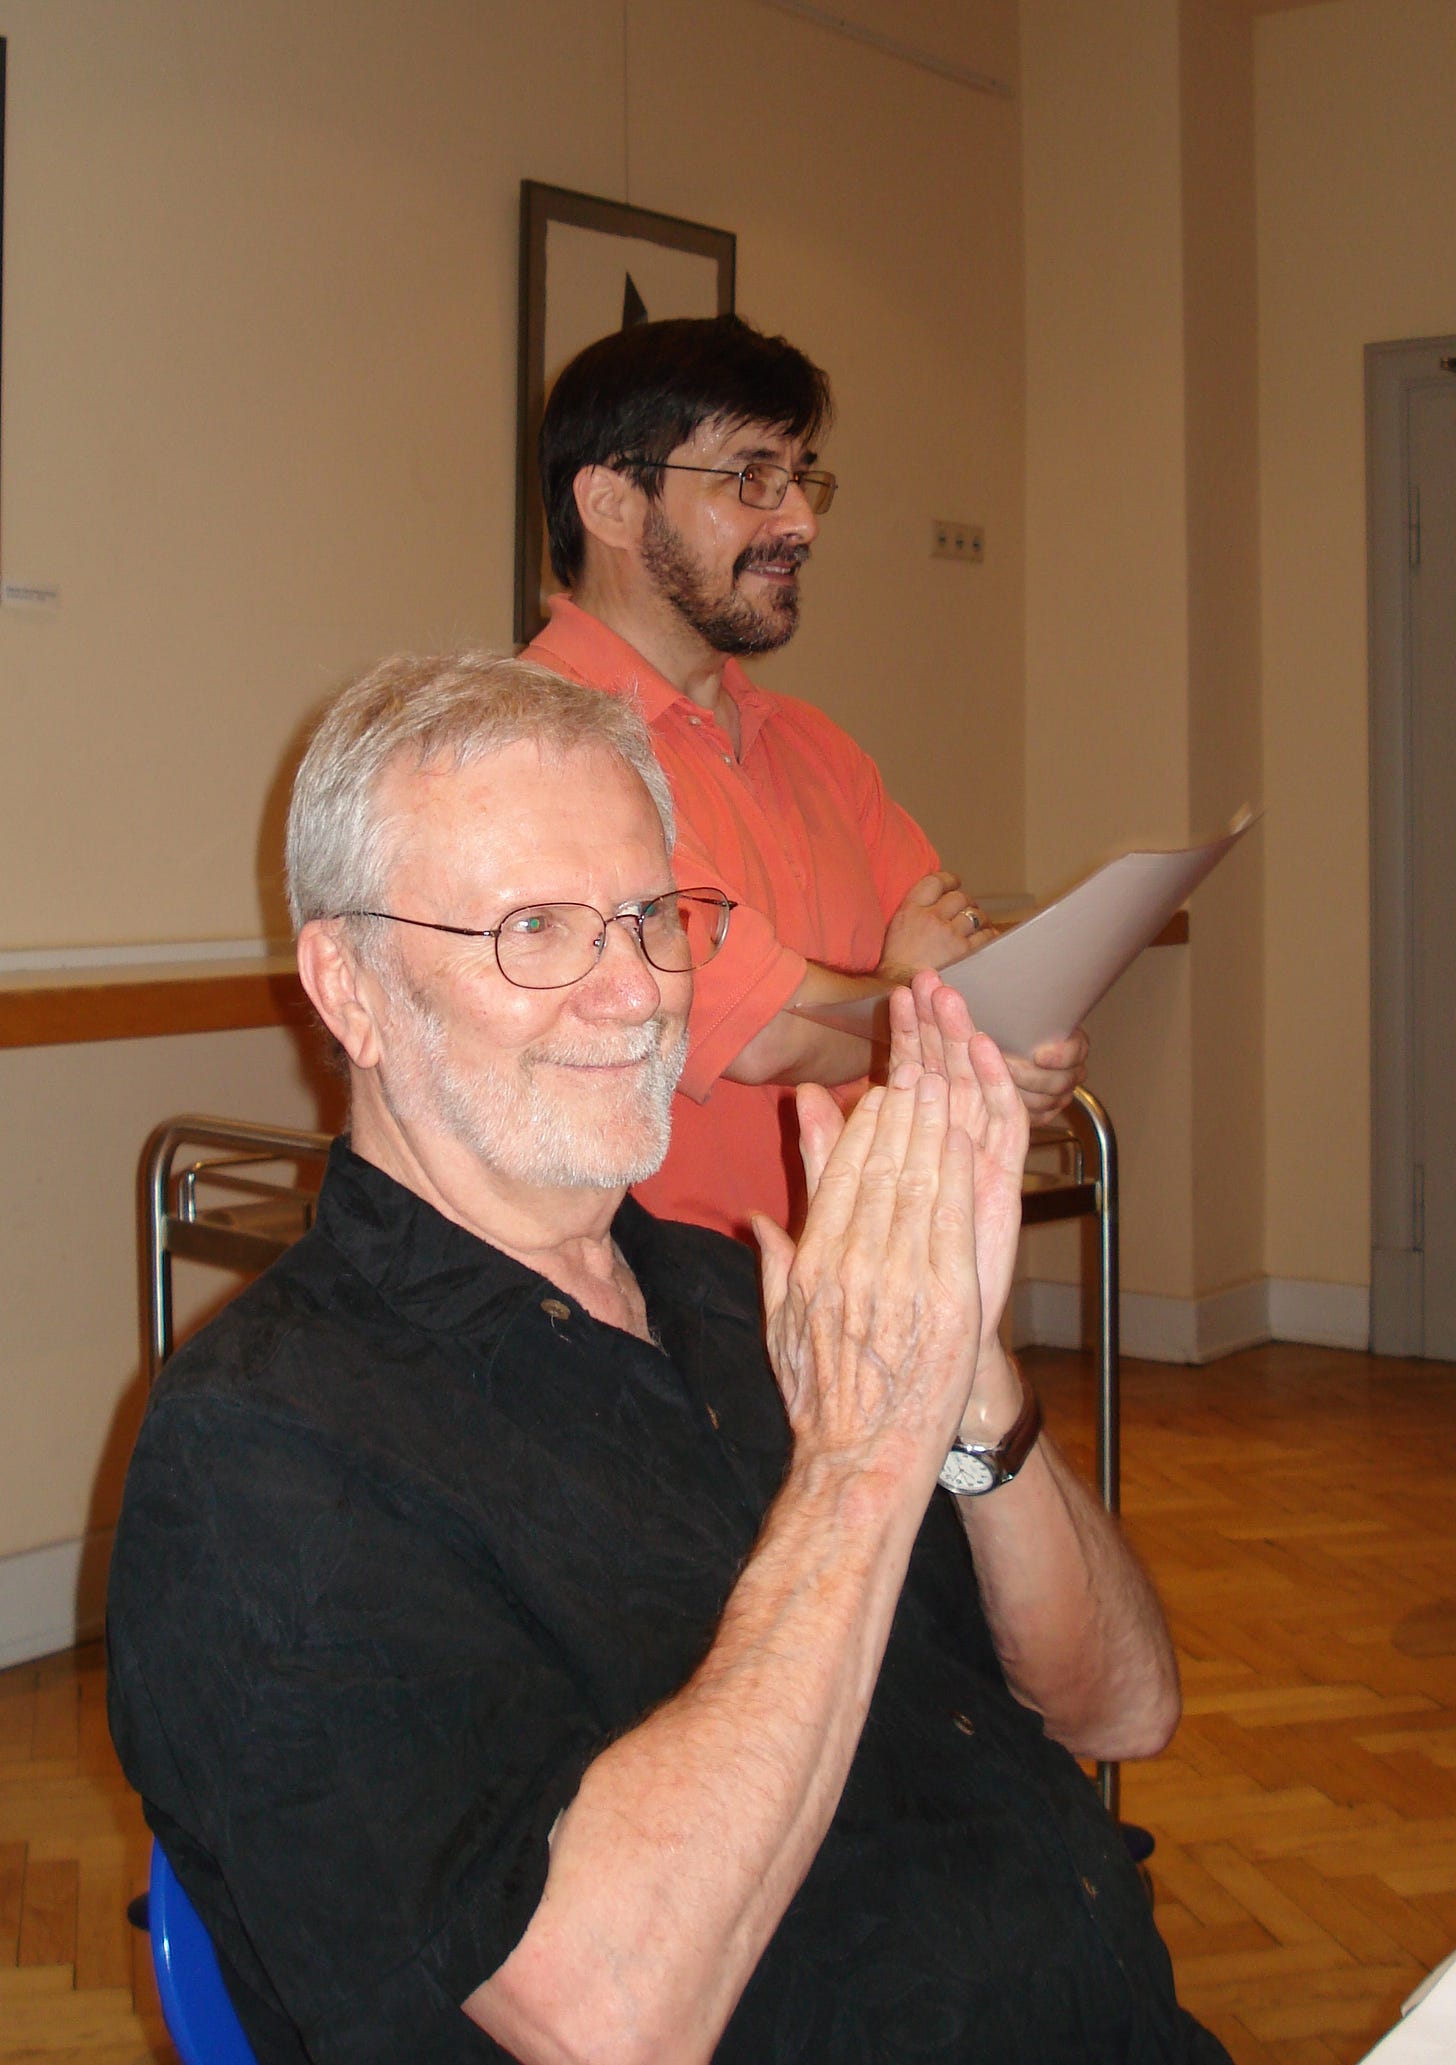 BK reacts with broad approval to a member's presentation, 30 June 2009. Dallman Ross stands behind him